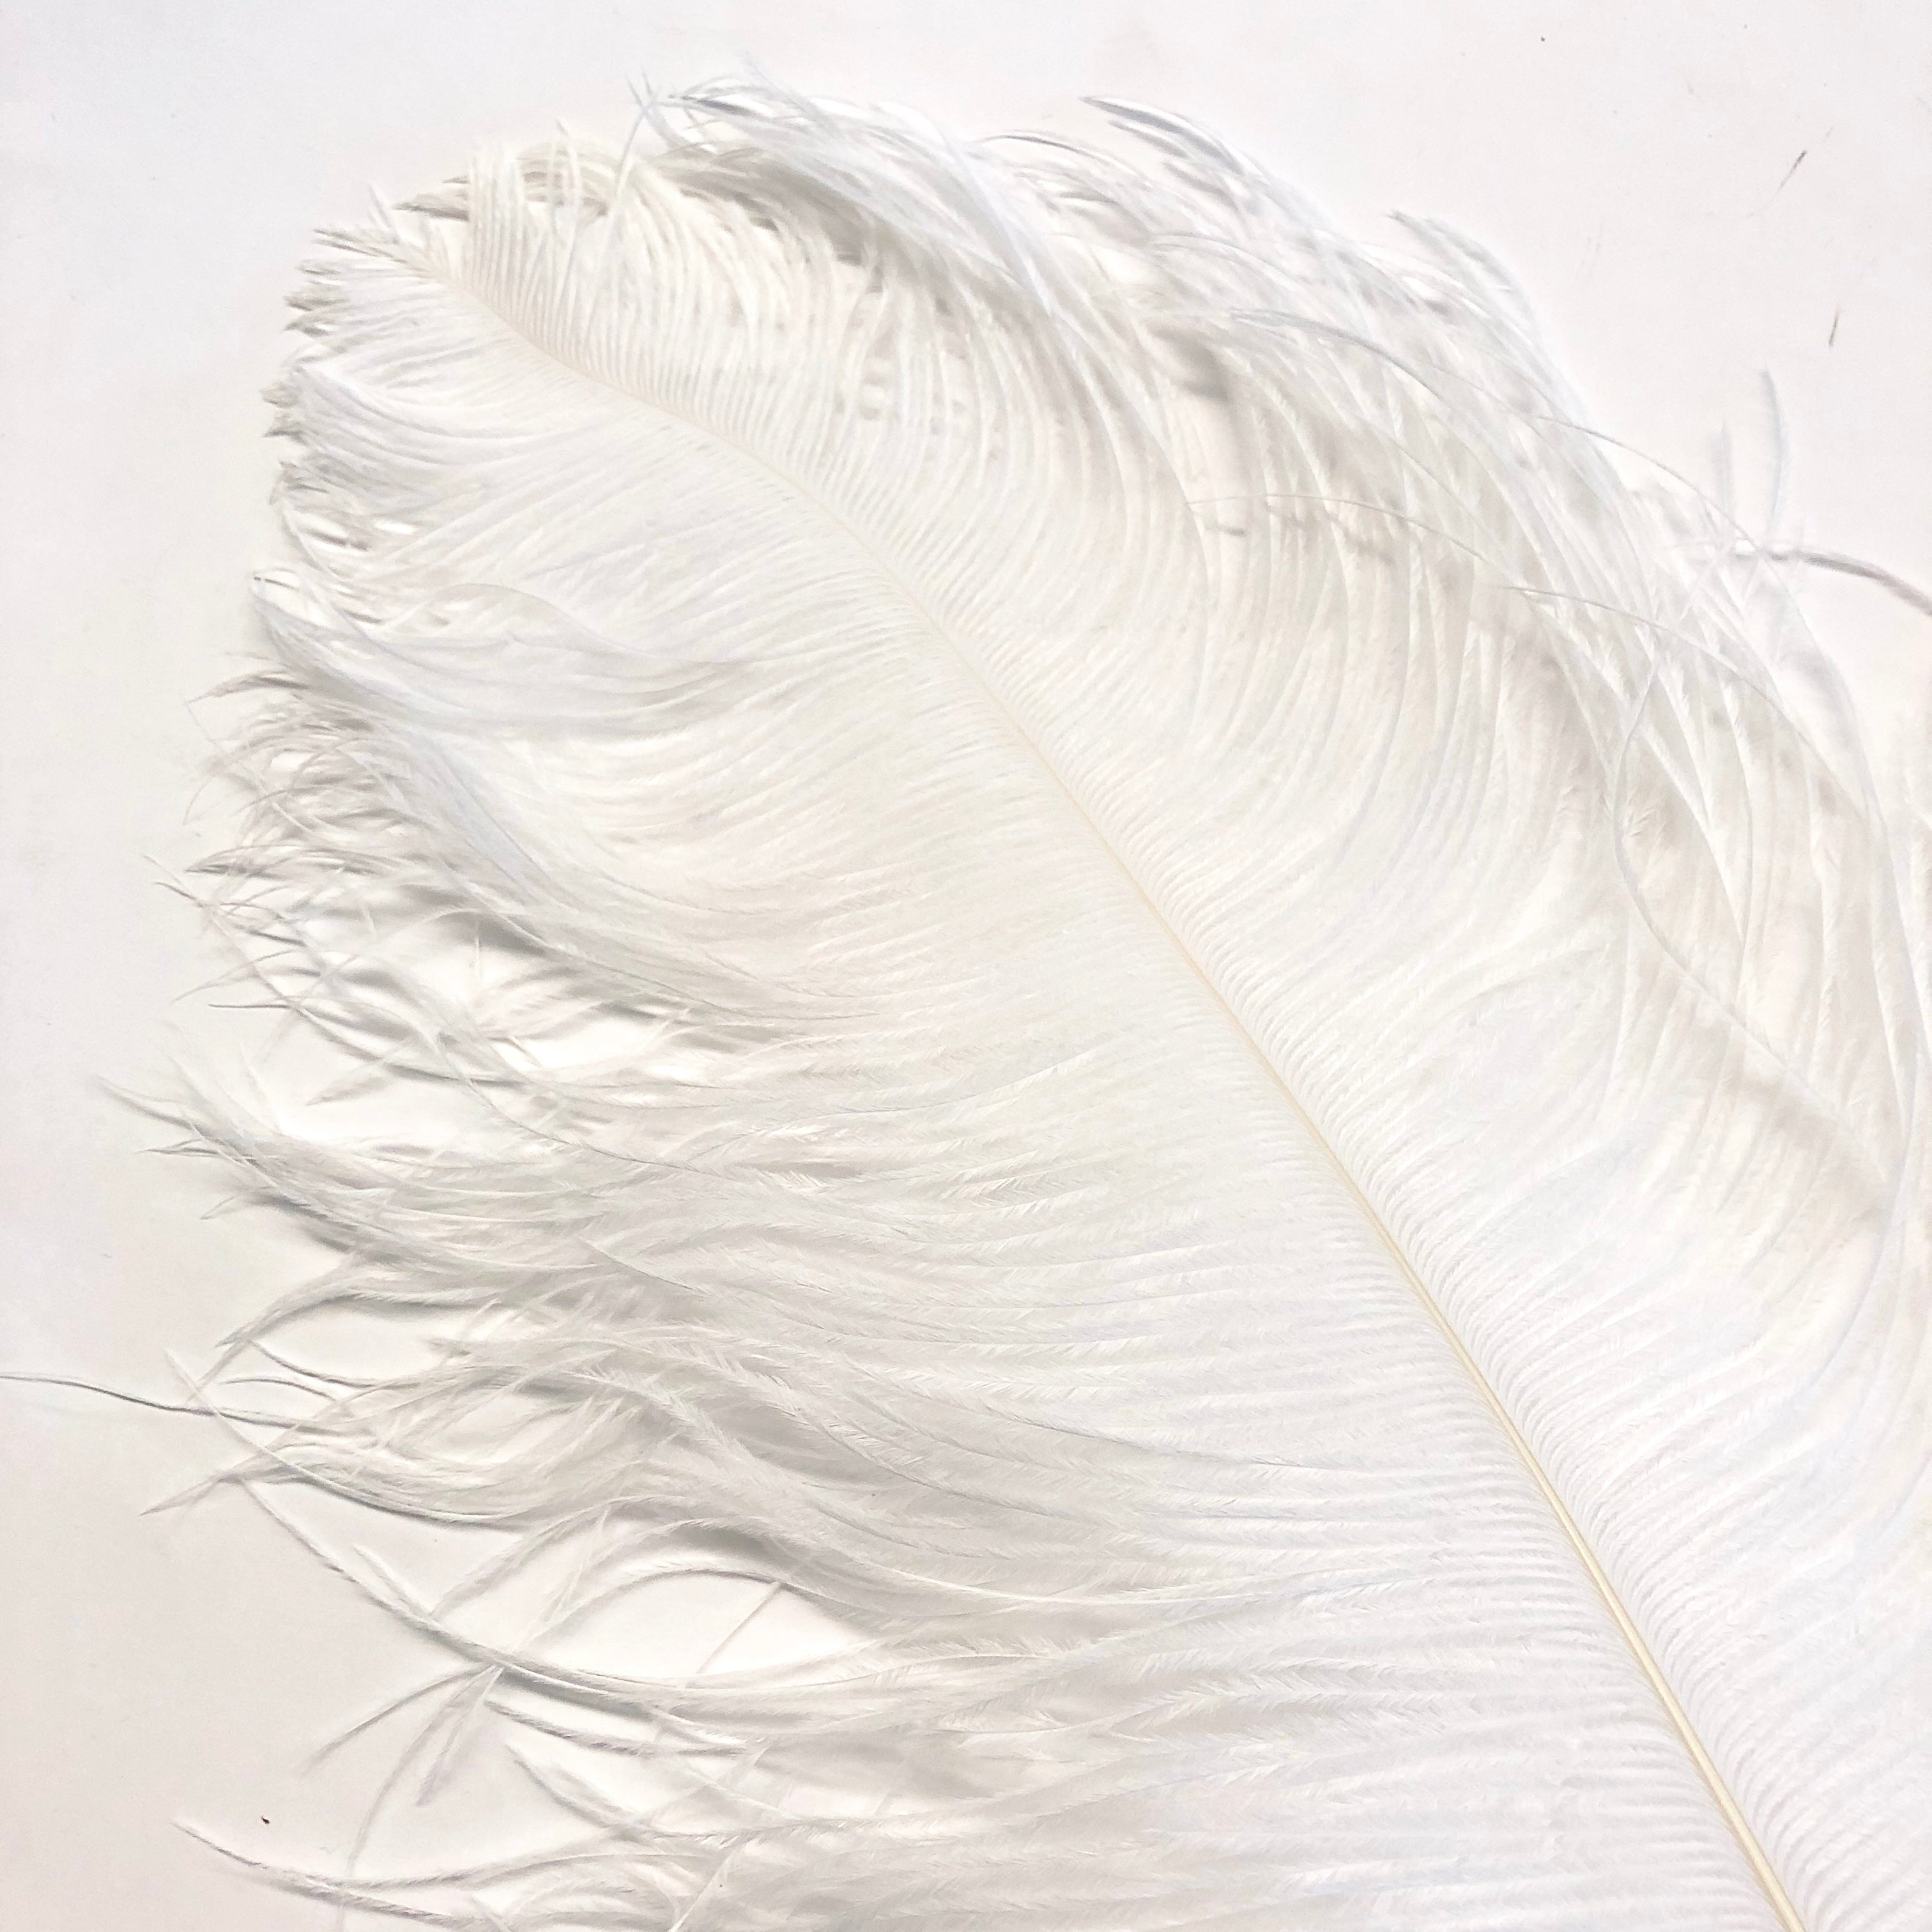 Ostrich Wing Feather Plumes 60-65cm (24-26") - White ((SECONDS))